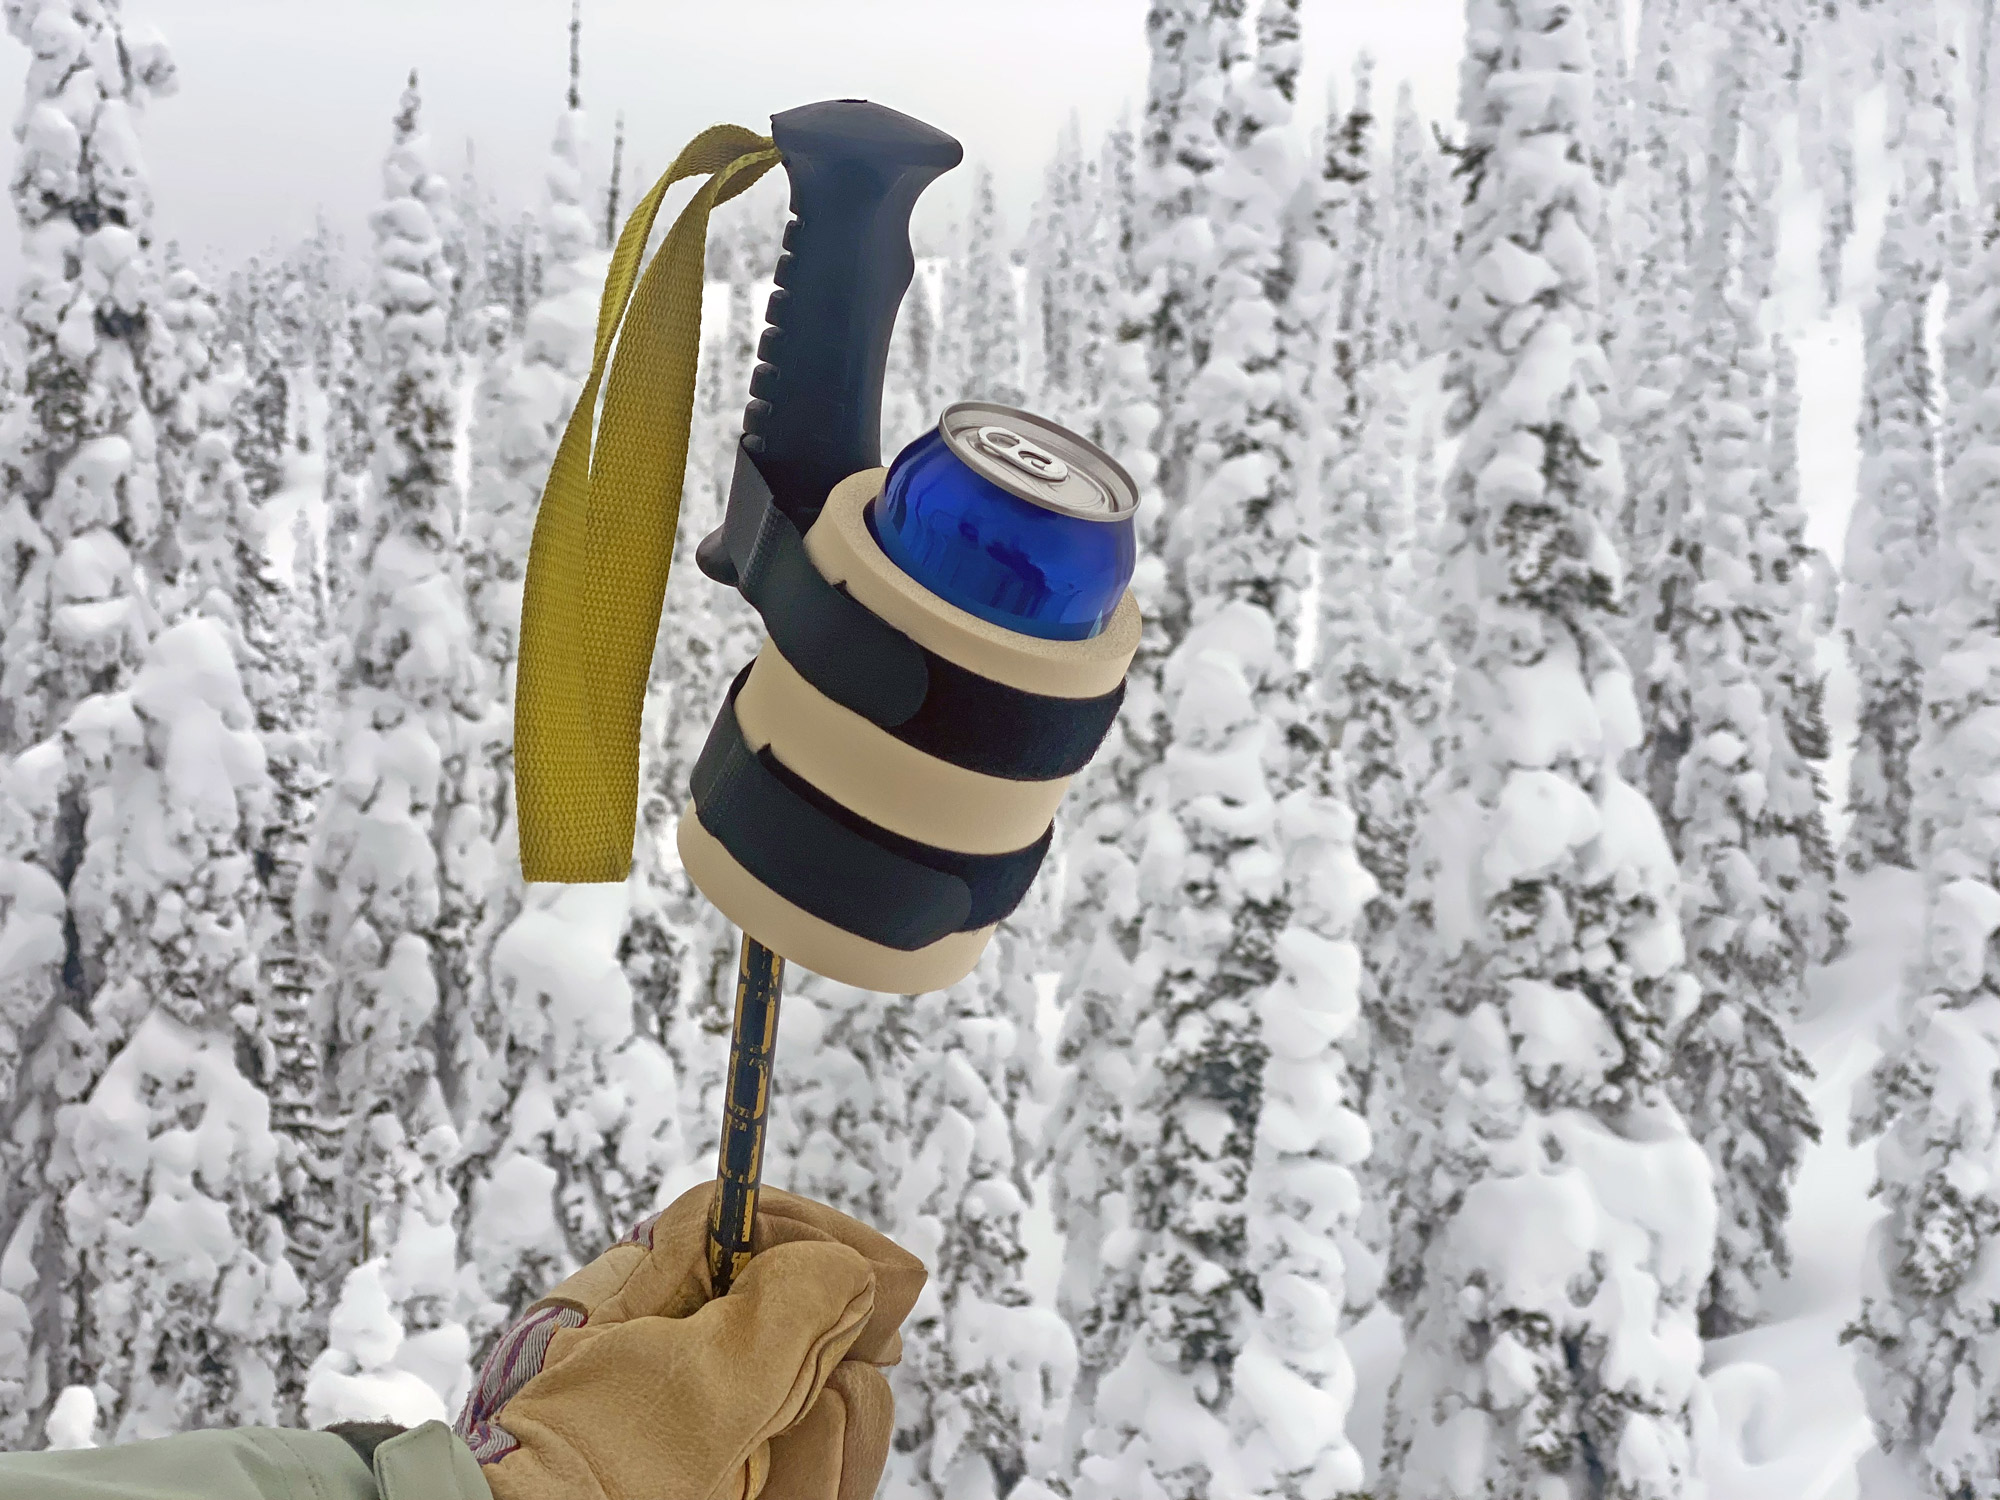 Attach a Beer to Ski Pole